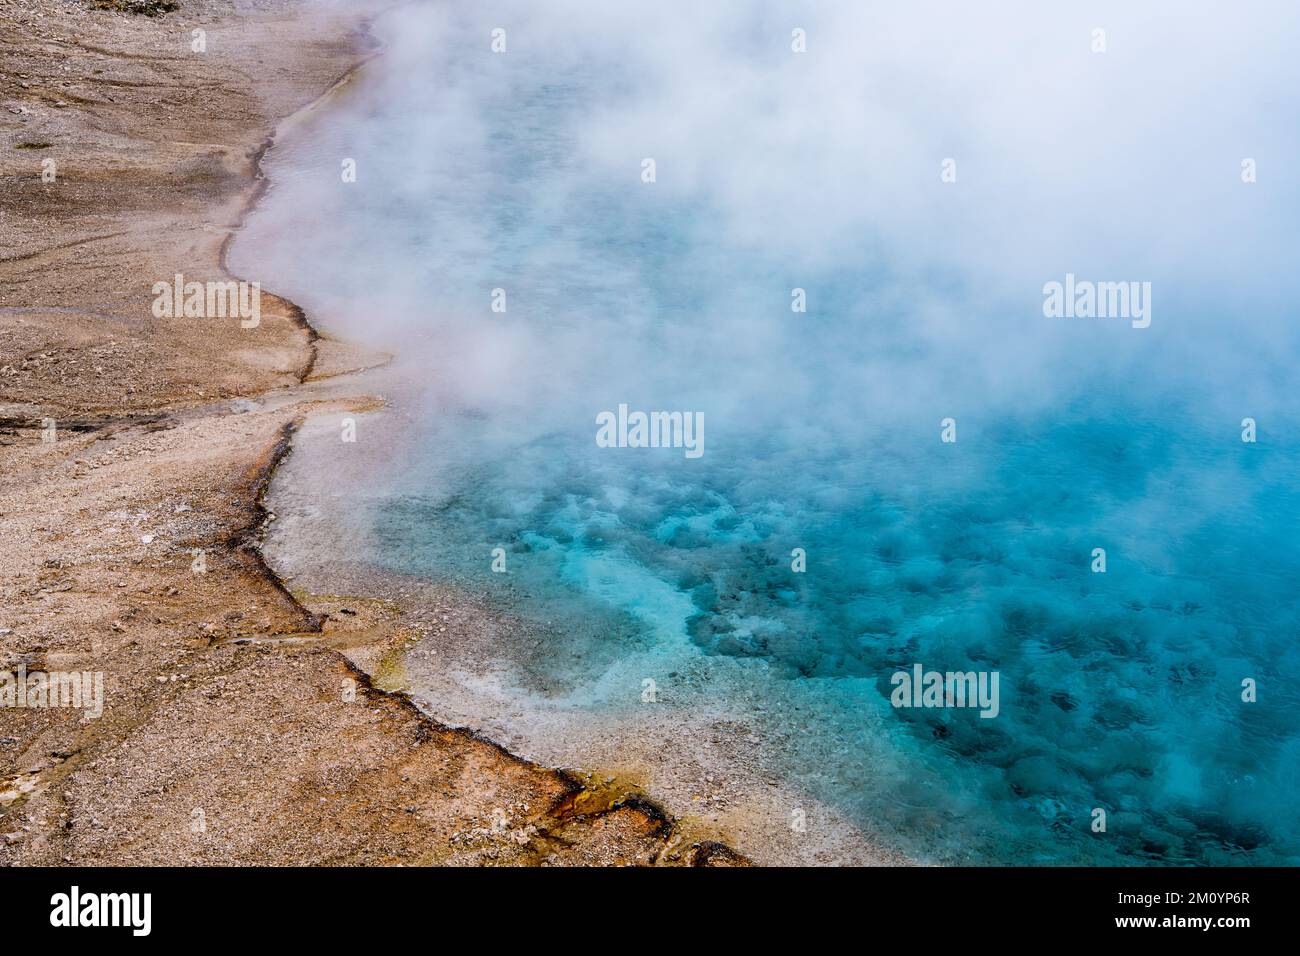 A beautiful pool of clear water and steam forms abstract scene with hues of blue and turquoise at Excelsior Geyser, Yellowstone National Park, Wyoming Stock Photo